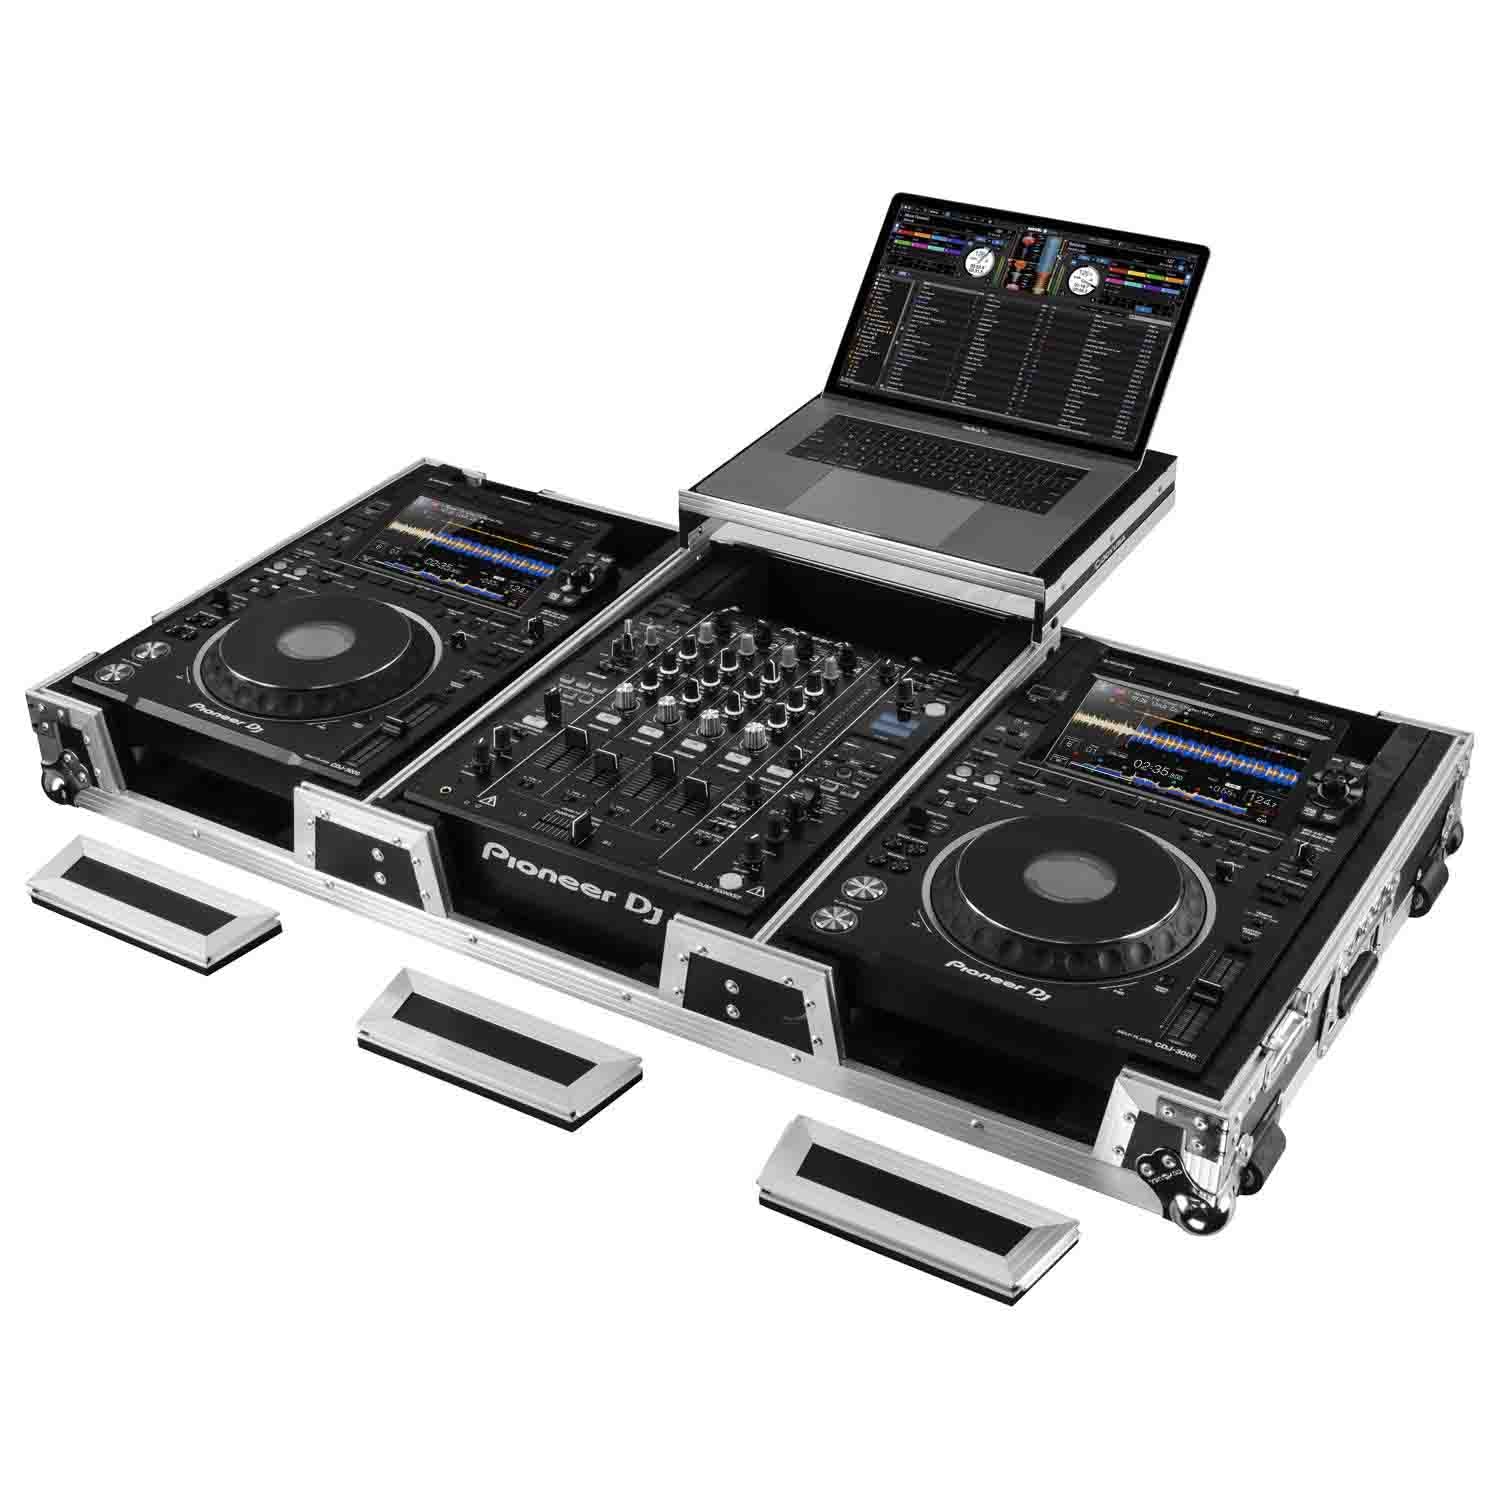 Odyssey FZGS12CDJWXD2 Extra Deep DJ Coffin Case for 12″ Format DJ Mixer and Two Media Players with Glide Platform Odyssey